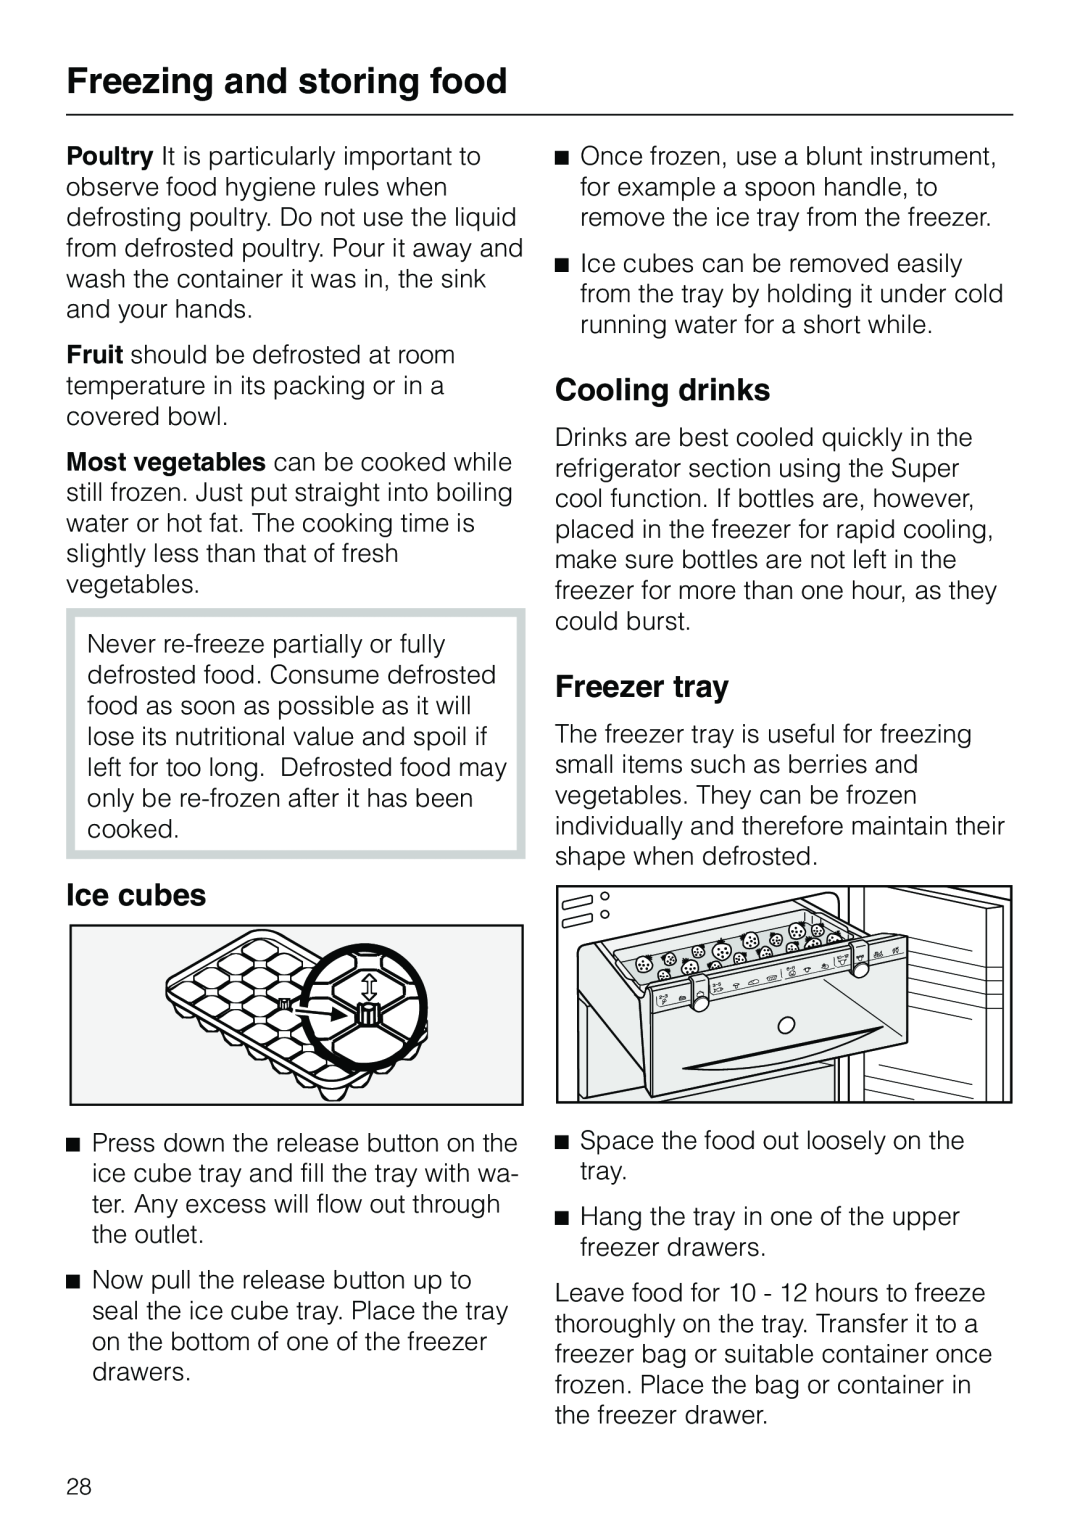 Miele KF 7540 SN installation instructions Ice cubes, Cooling drinks, Freezer tray, Freezing and storing food 